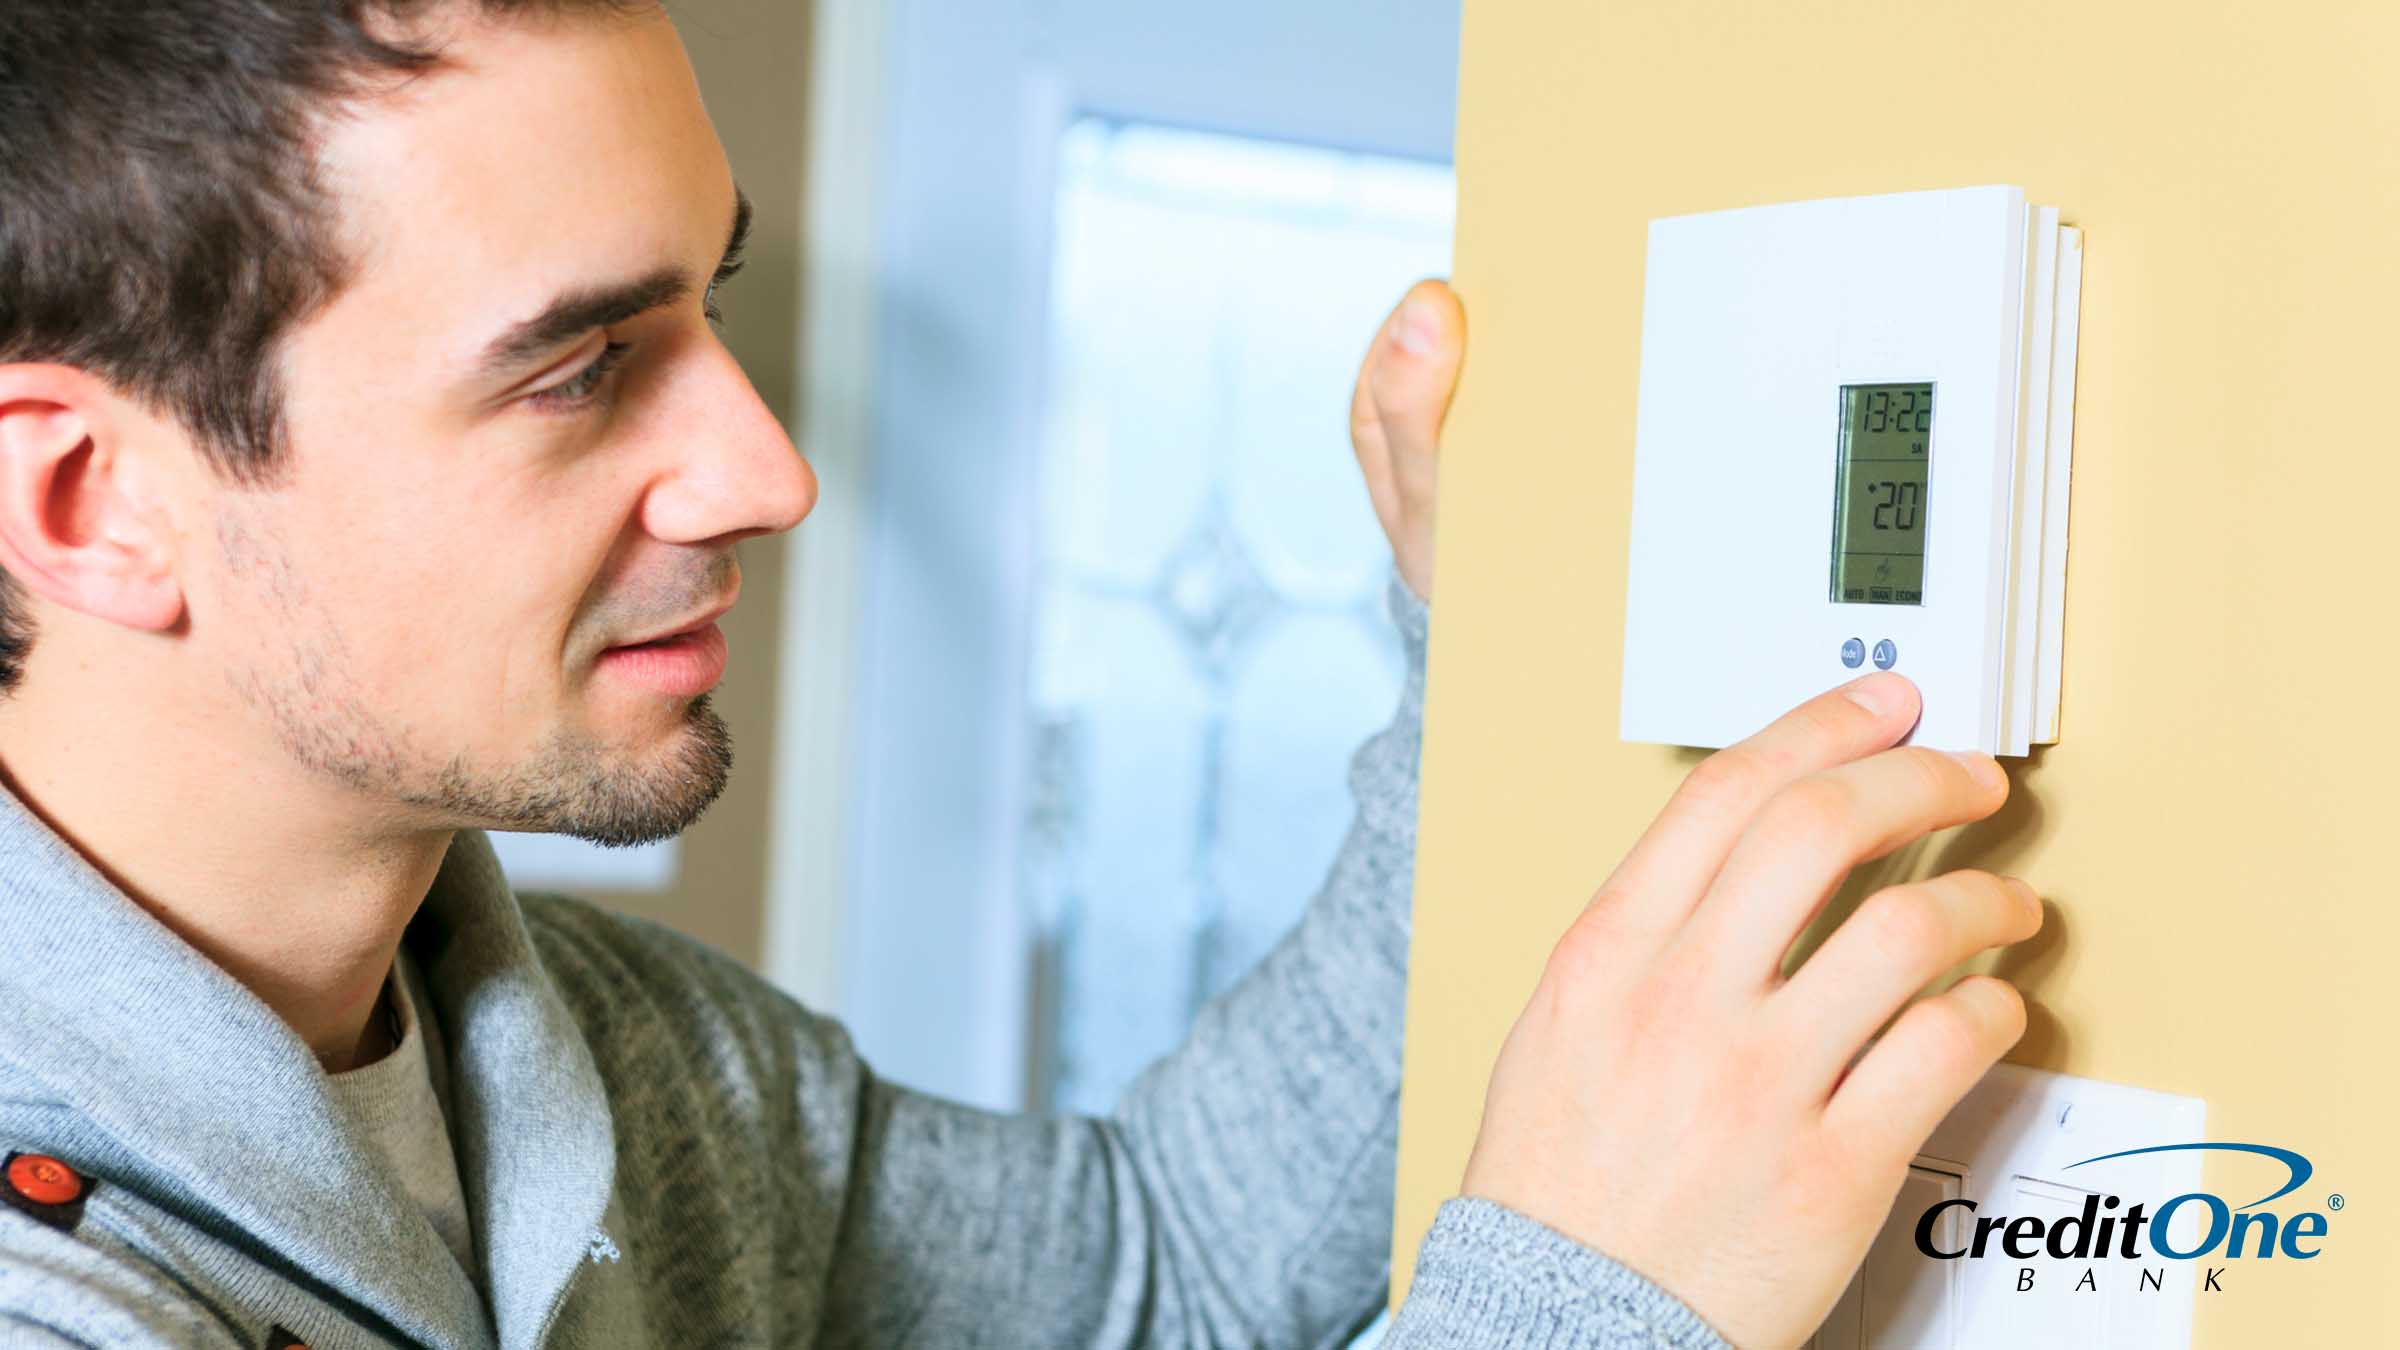 A man checking the thermostat in his home